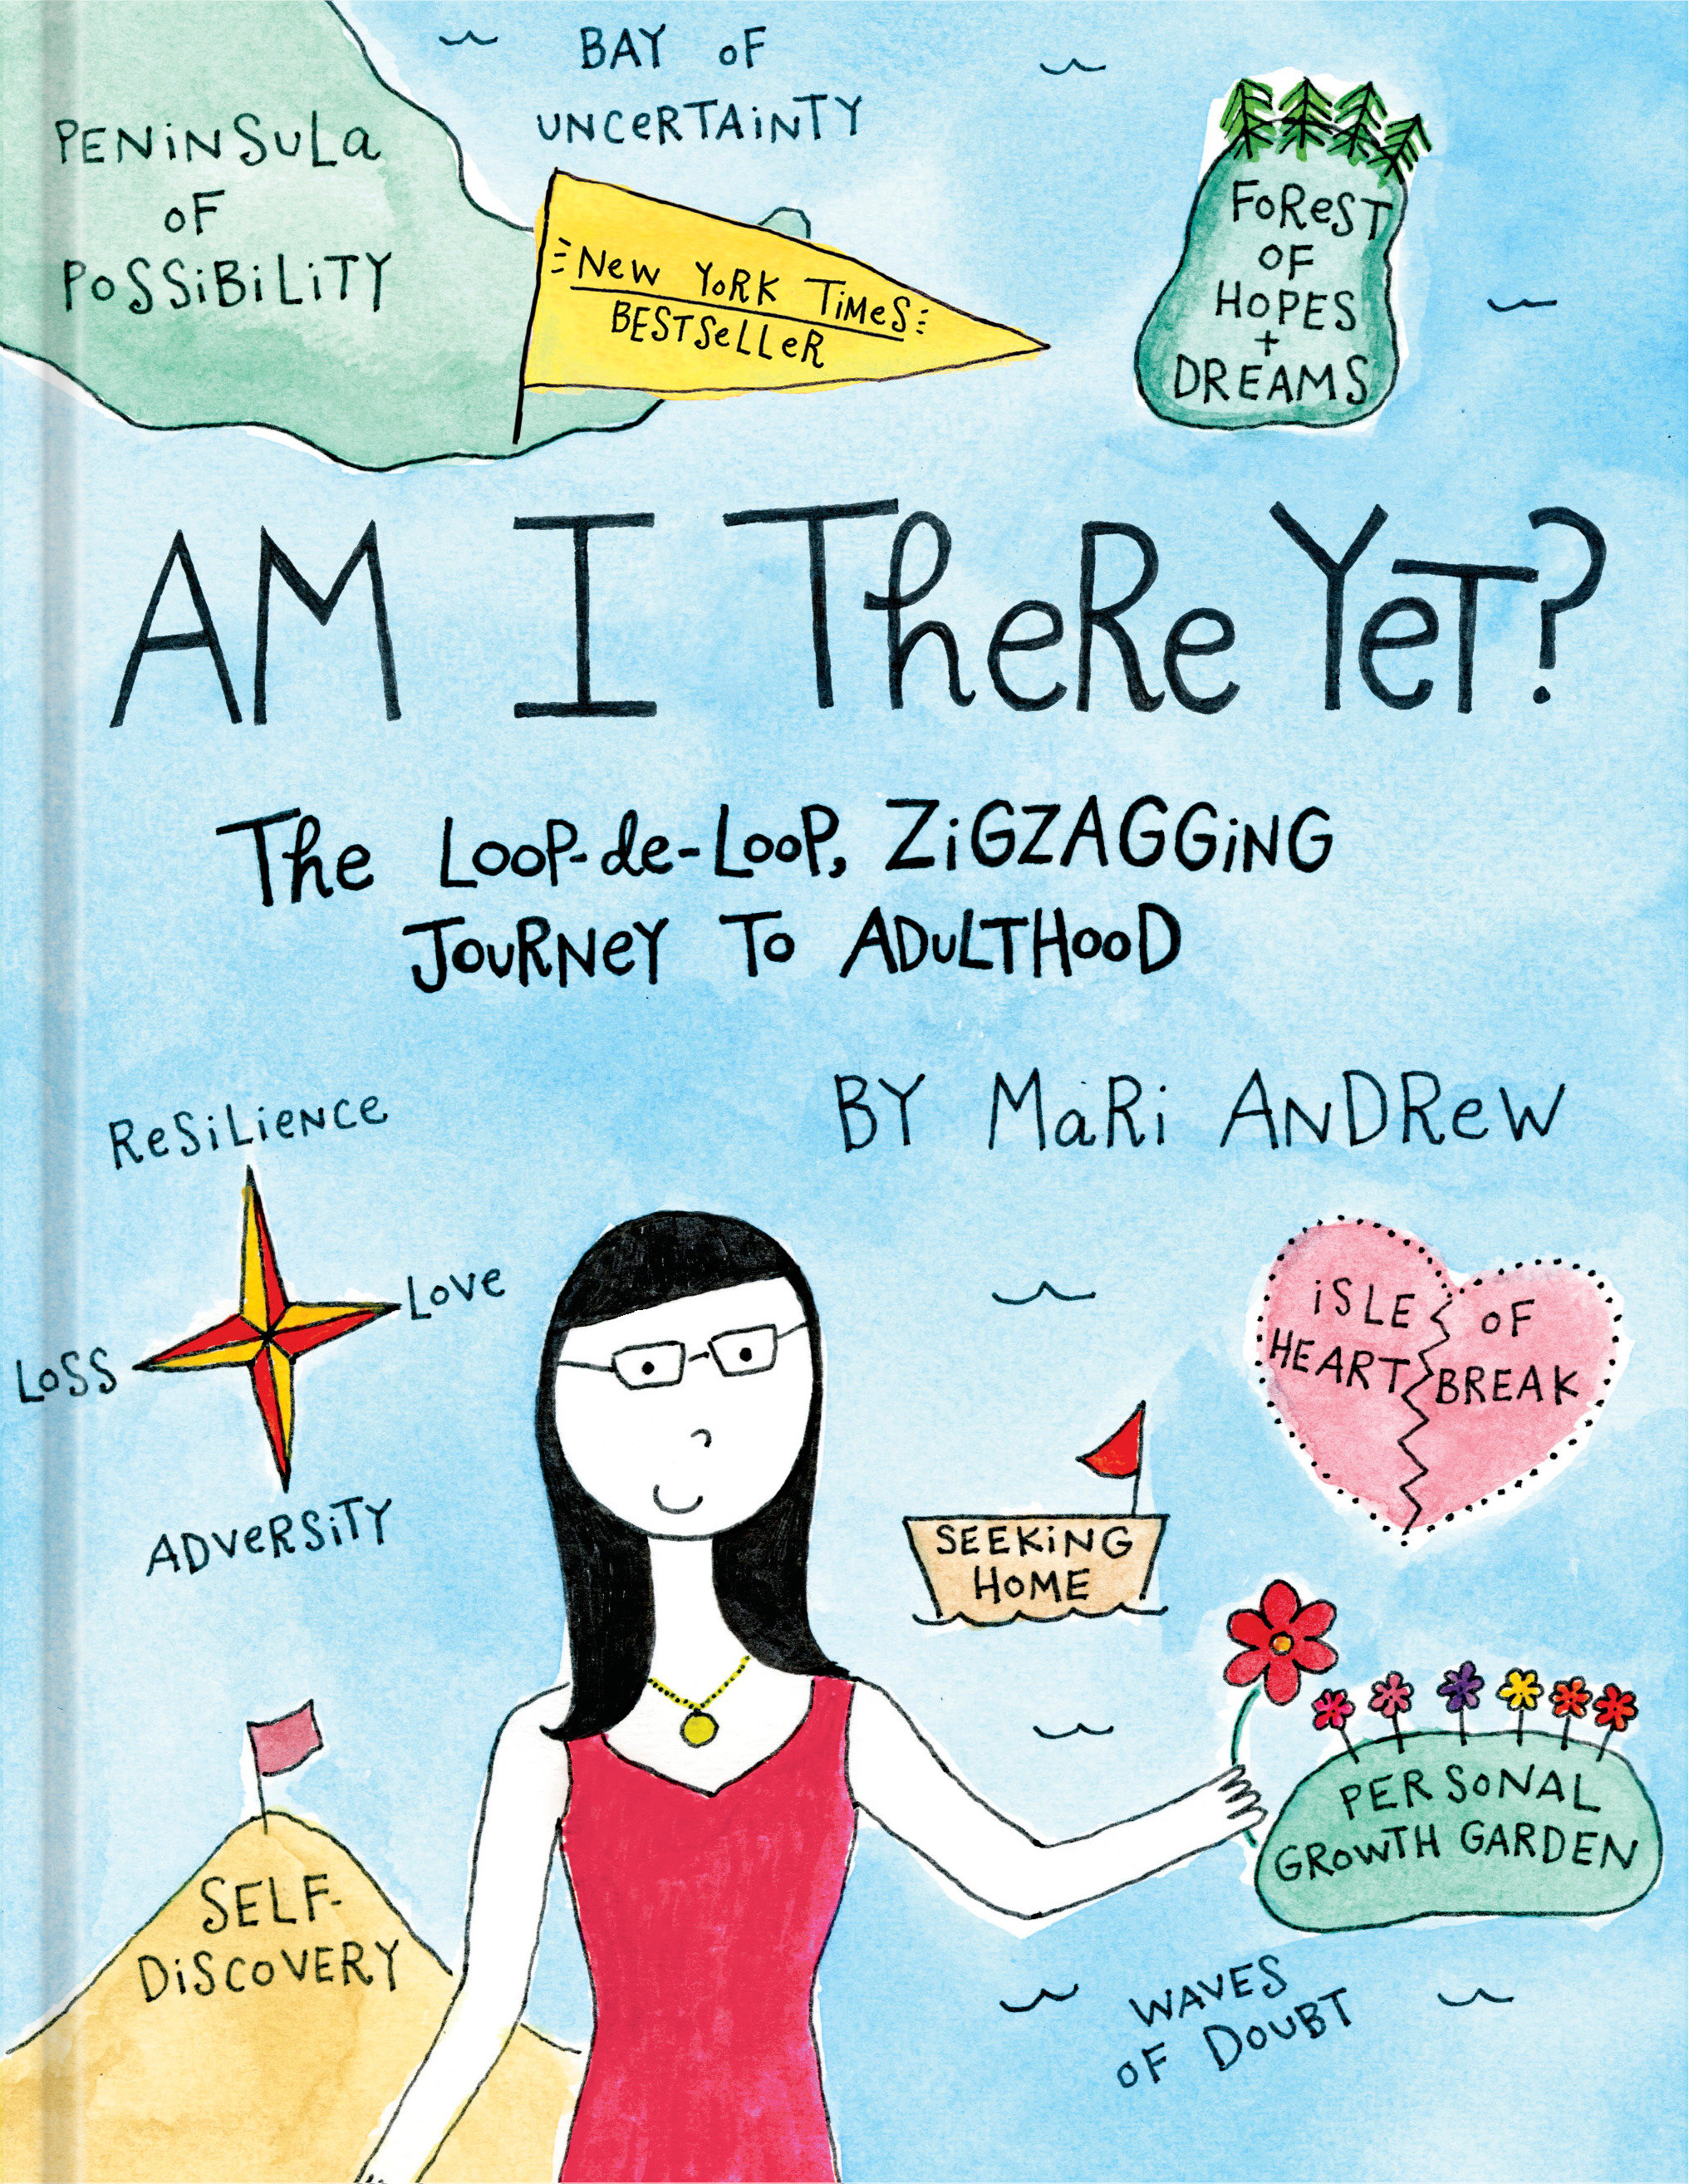 Am I There Yet? (Hardcover Book)